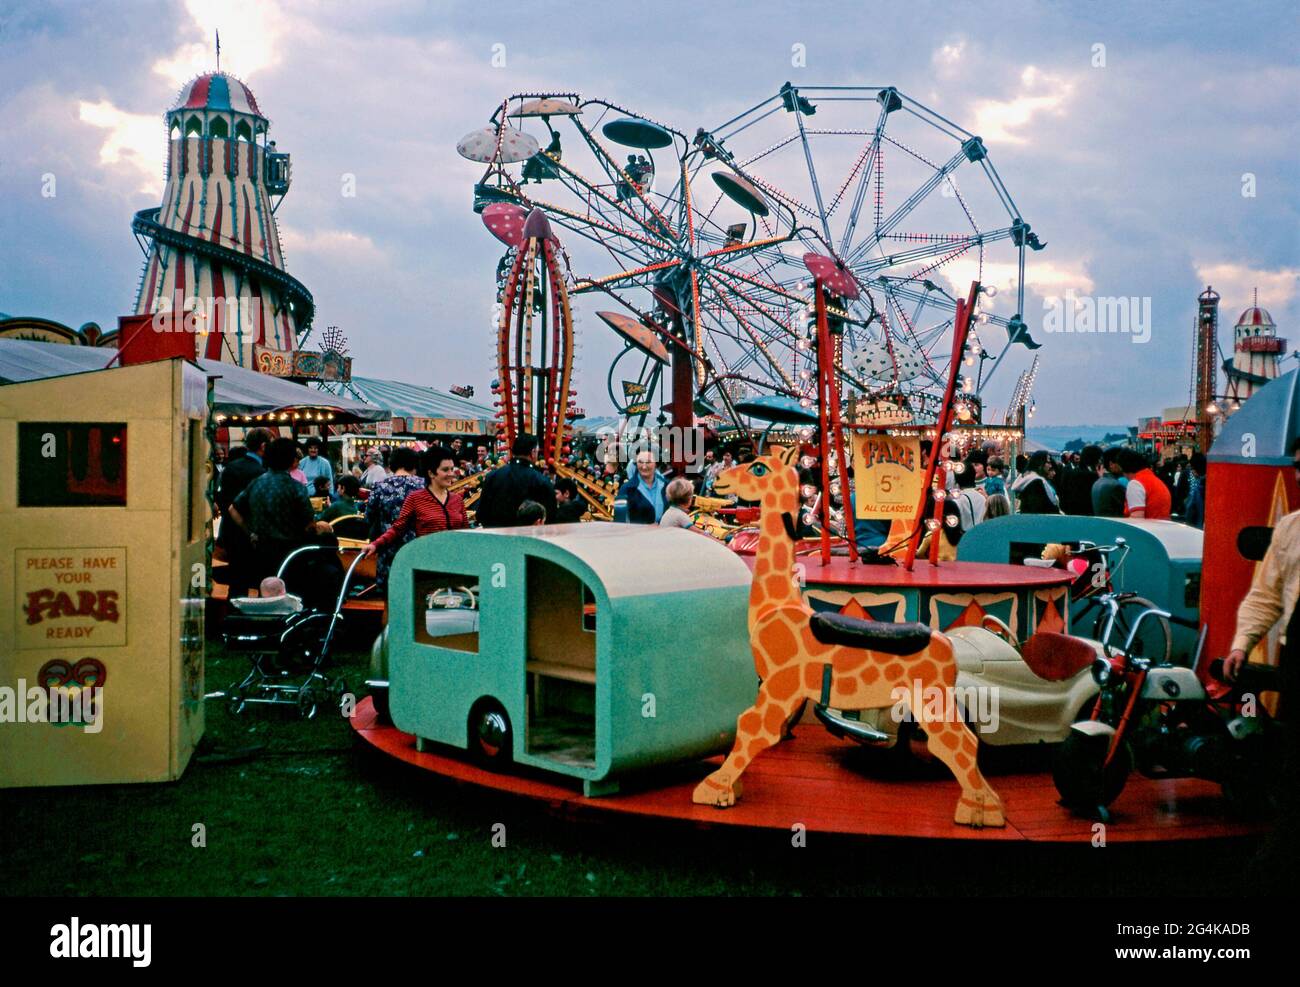 Crowds at dusk at the Bridgewater Fair, Bridgewater, Somerset, England, UK in September 1971. The rides include the big wheel, helter-skelter and various roundabouts and merry-go-rounds. The lights are on and traditional, colourful signs of hand-painted fairground lettering and art are visible. The St Matthews fair dates back to 1249. The traditional annual four-day event takes place in St Matthew’s Field in September – a vintage 1970s photograph. Stock Photo